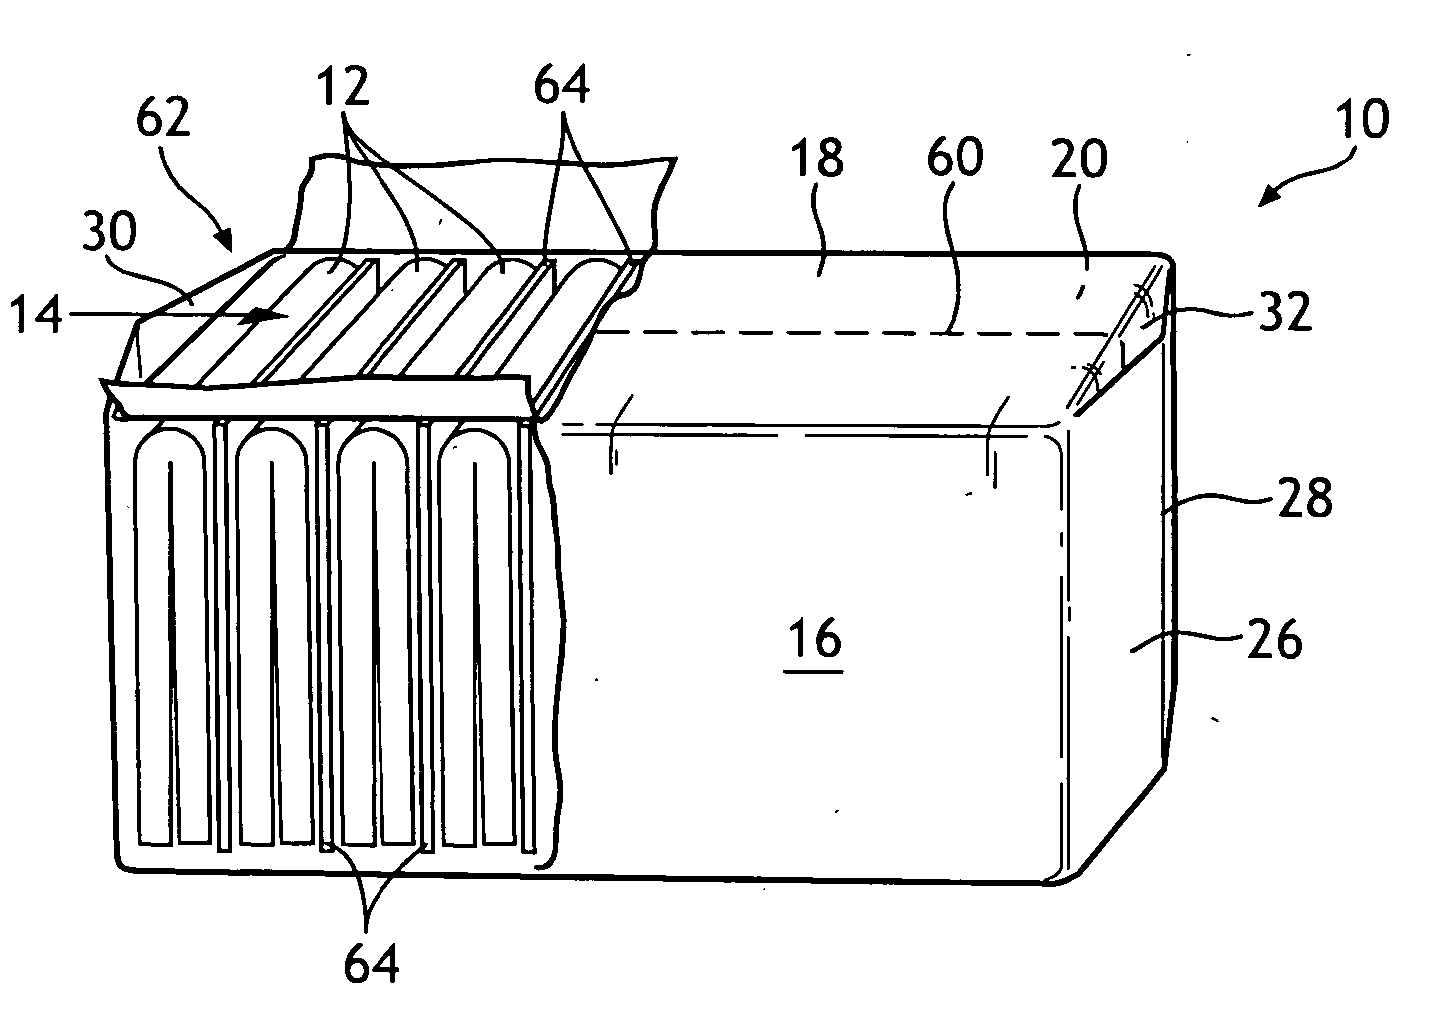 Dispensing aid for facilitating removal of individual products from a compressed package